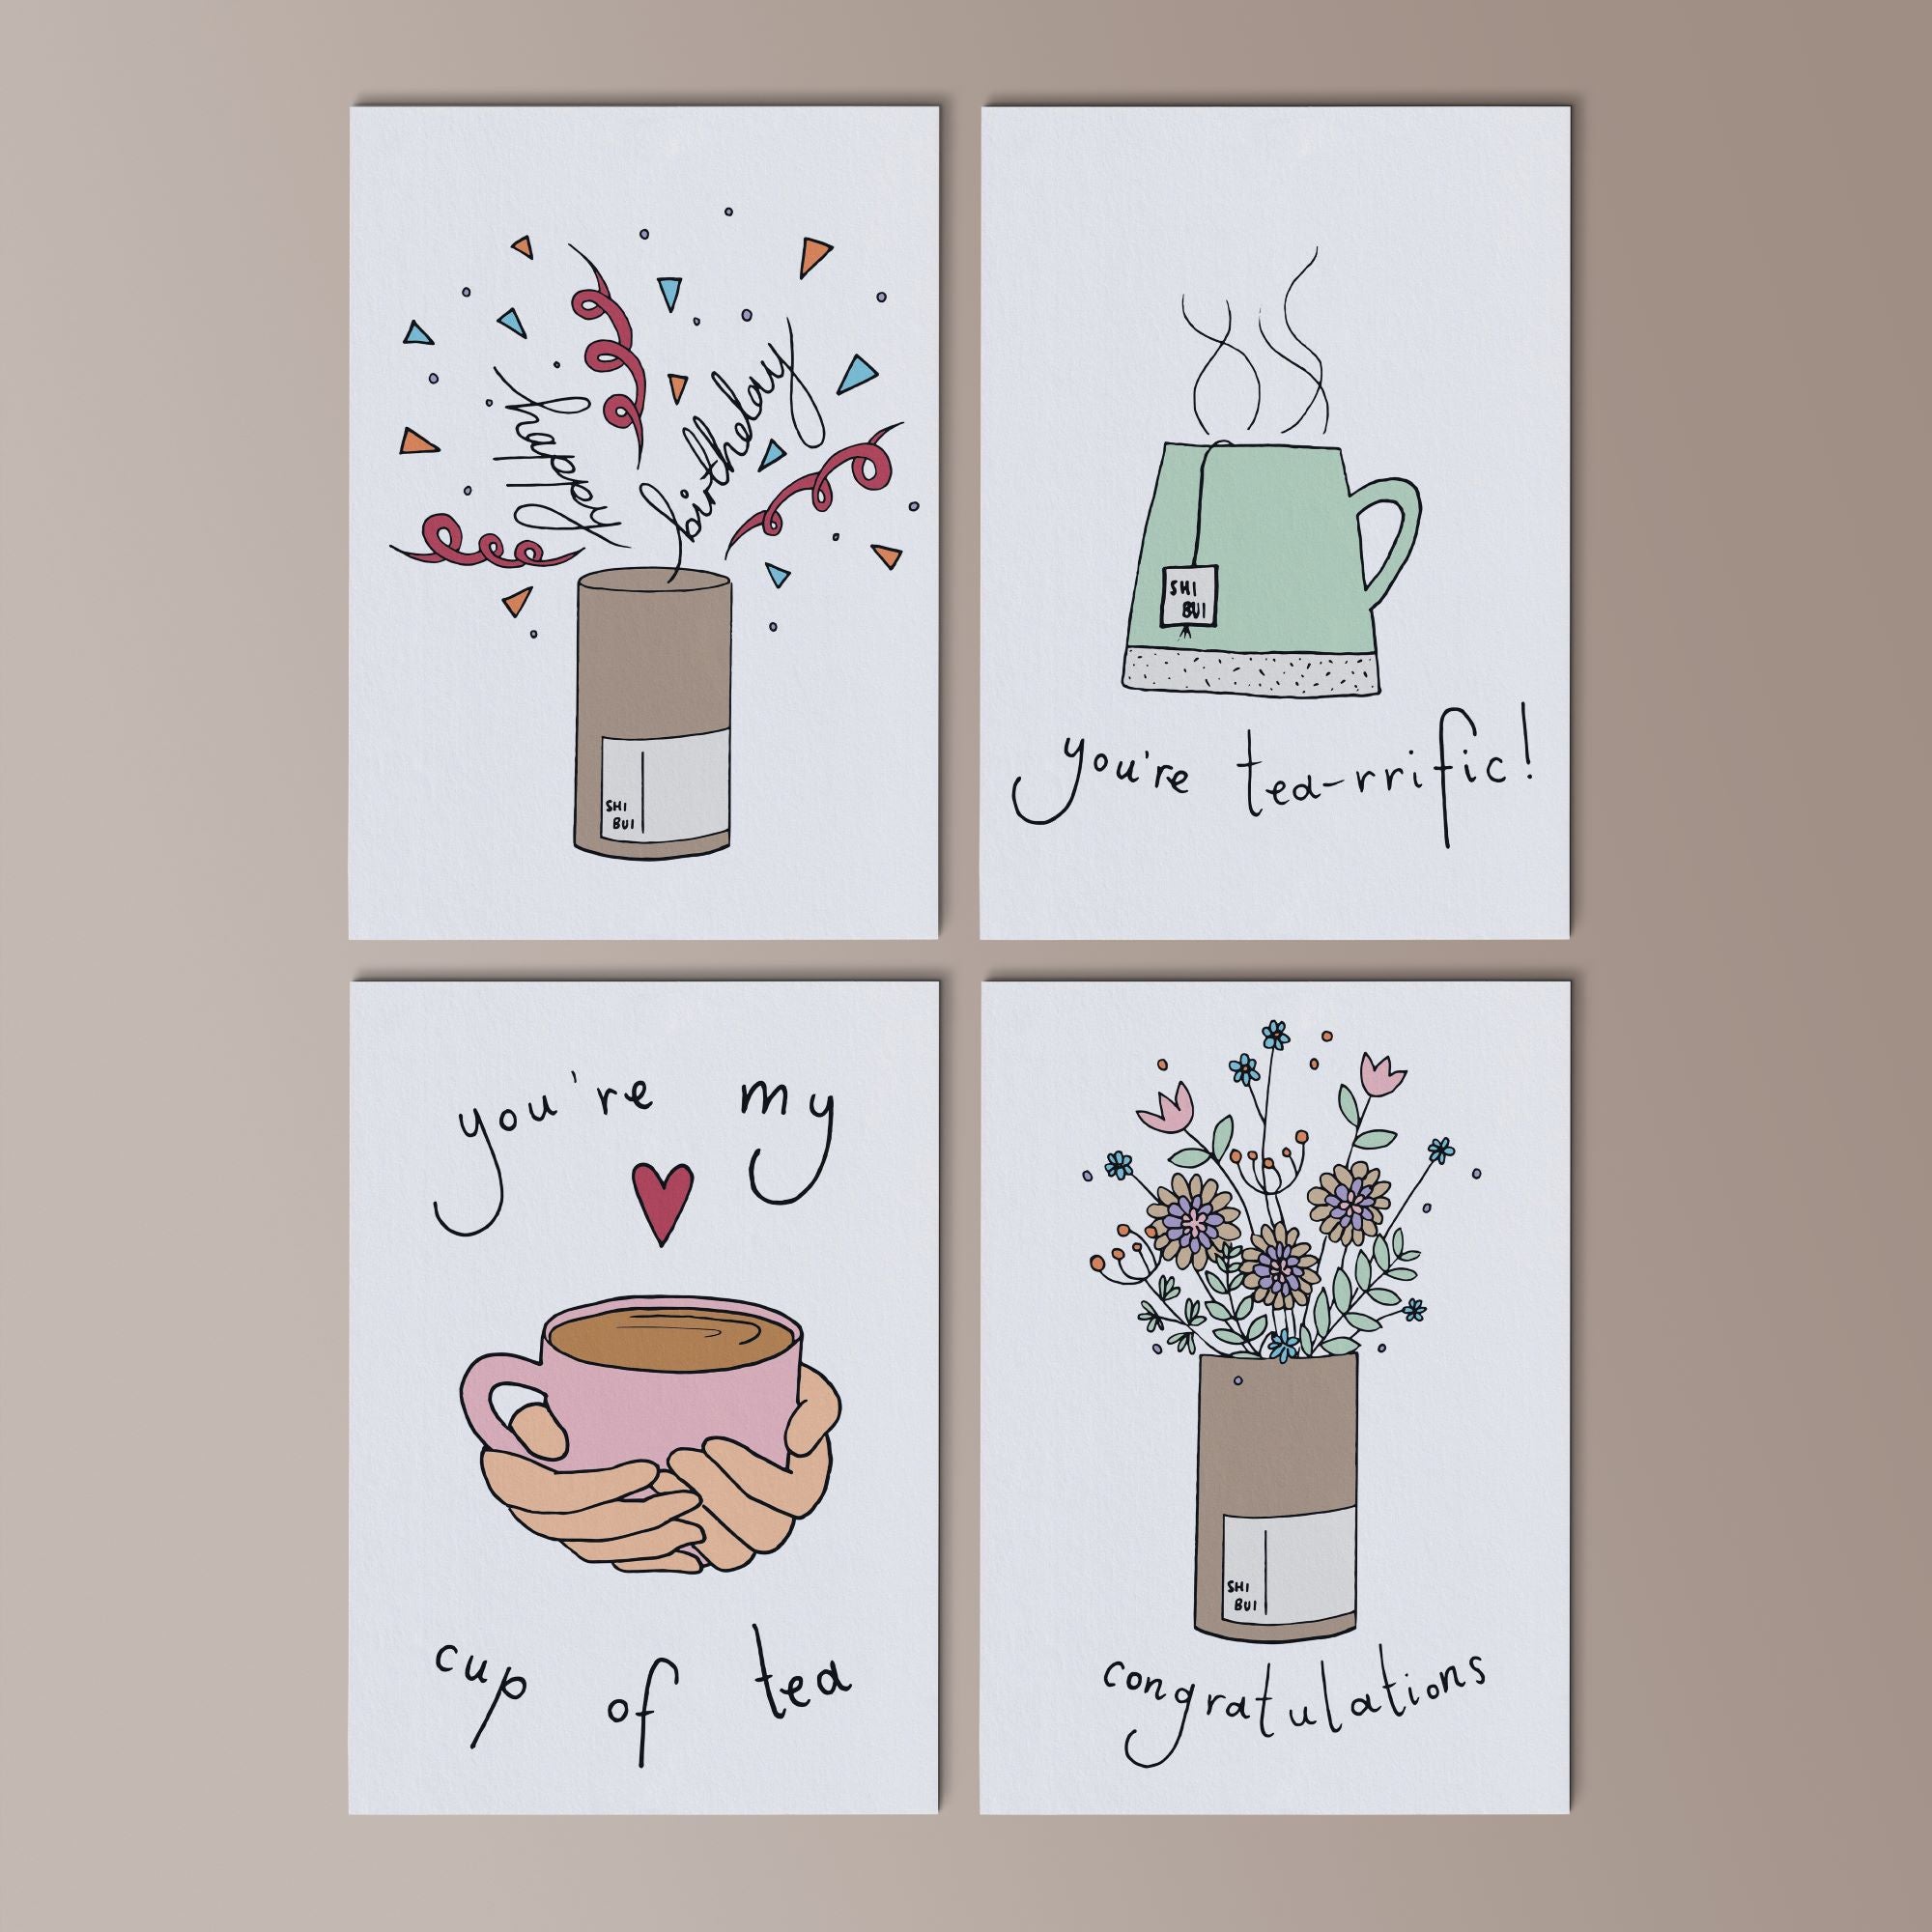 Send a Greetings Card with some tea!